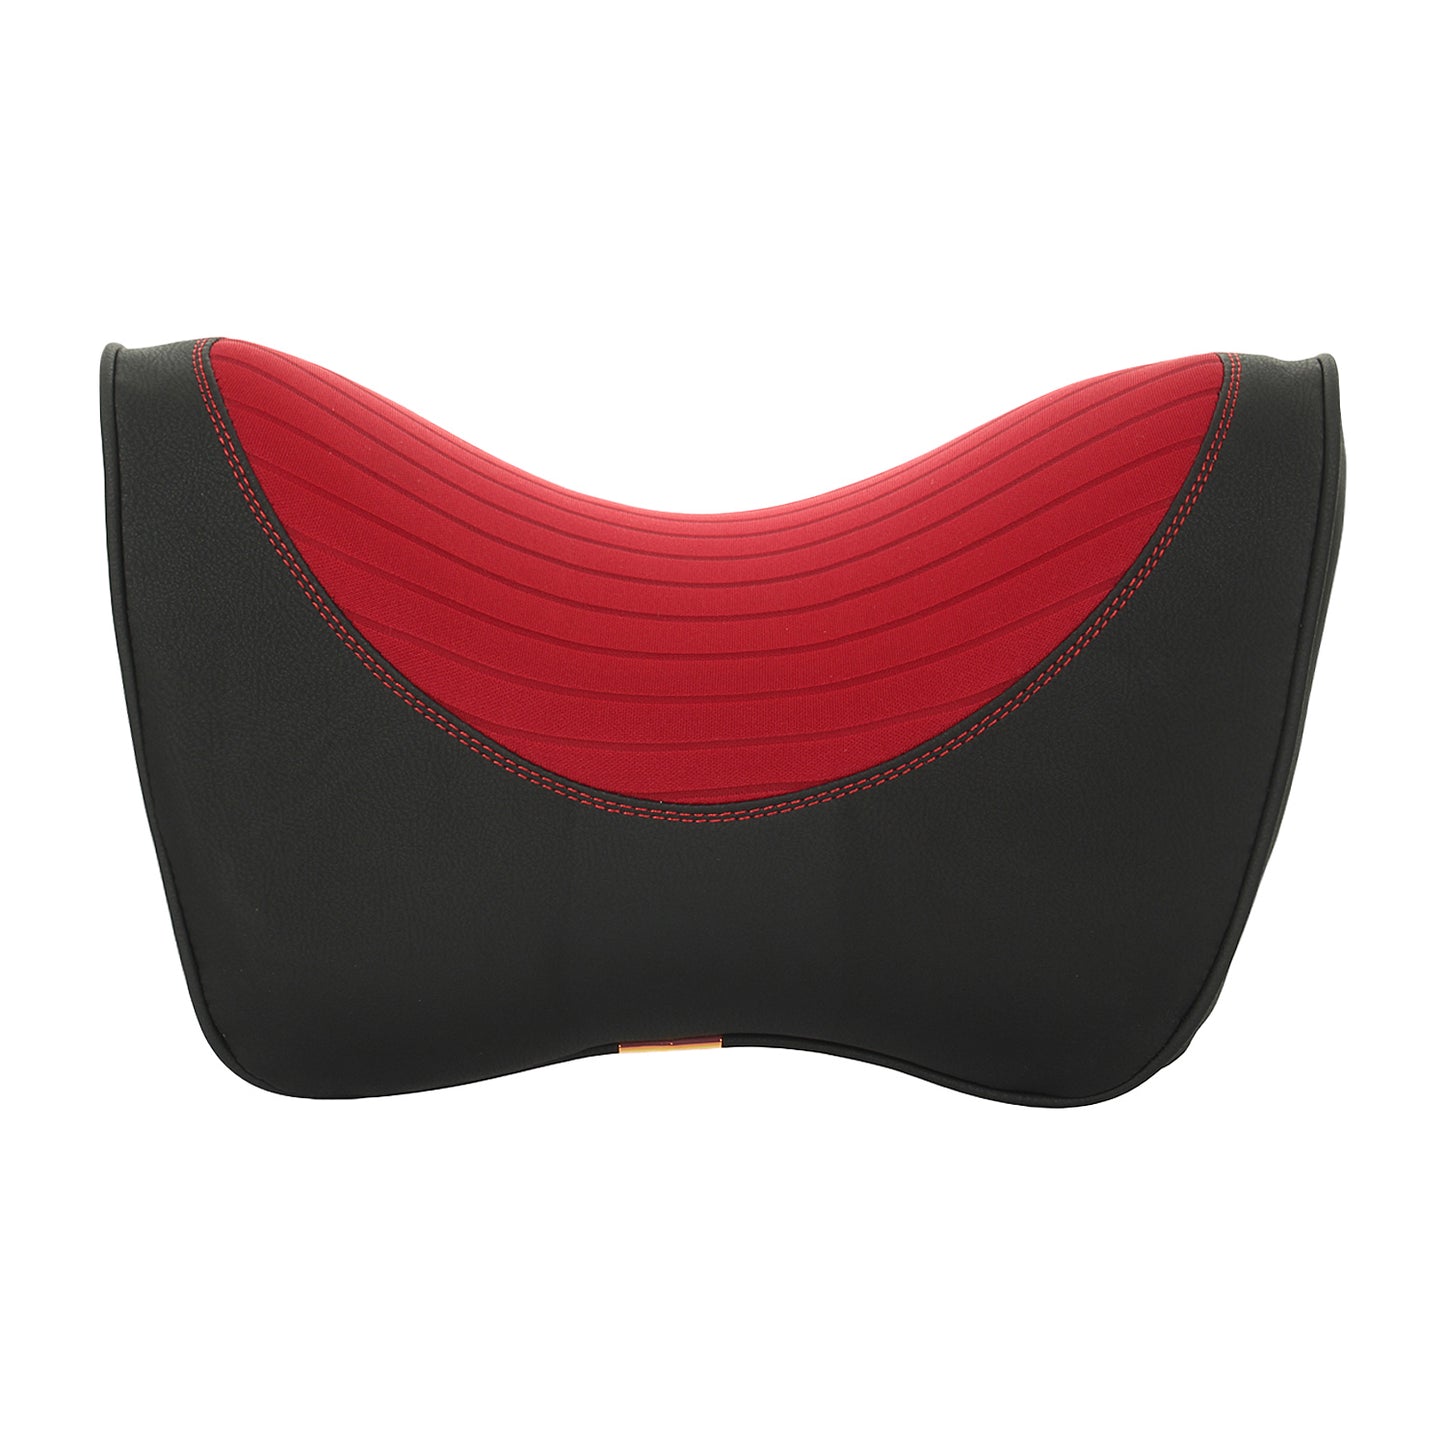 Oshotto Memory Foam (NR-05) Car Neck Rest, Neck Support for All Cars (Black, Red)